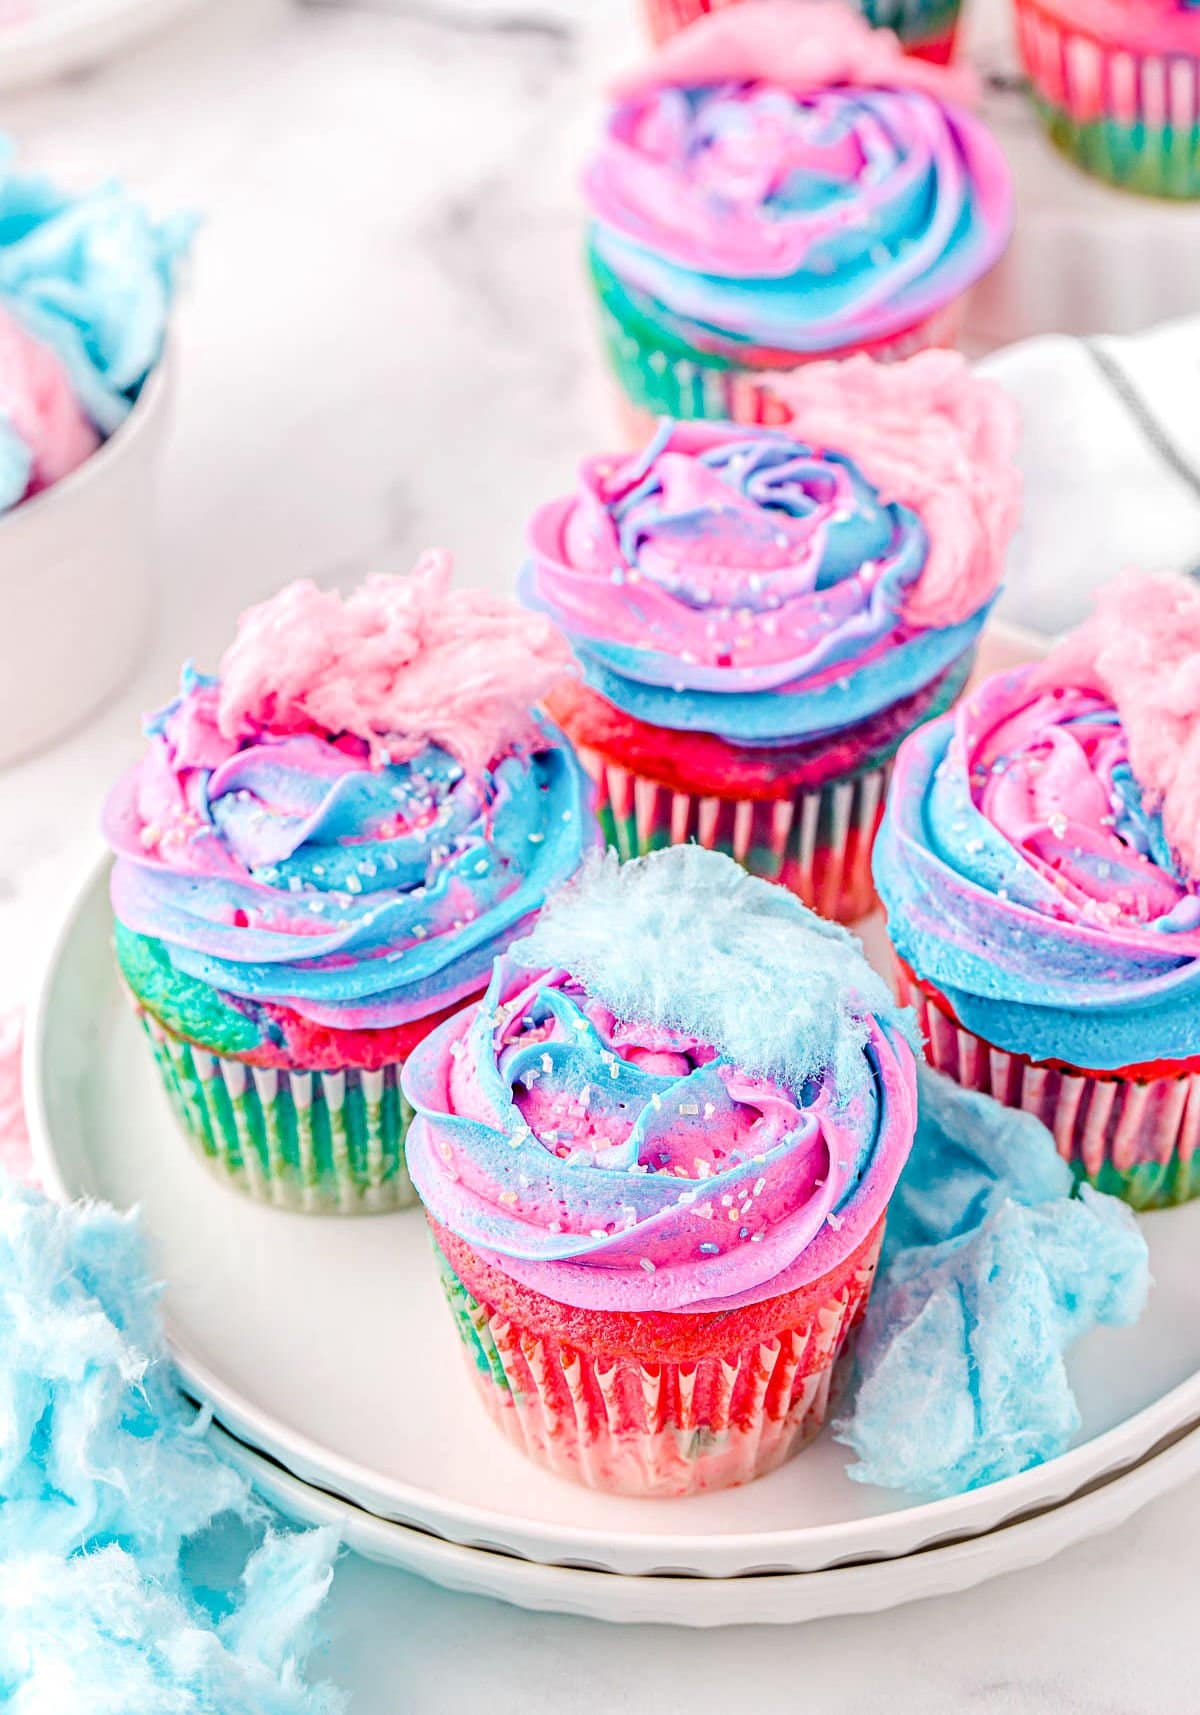 five cotton candy cupcakes sitting on a white plate topped with swirled frosting and small pieces of cotton candy.